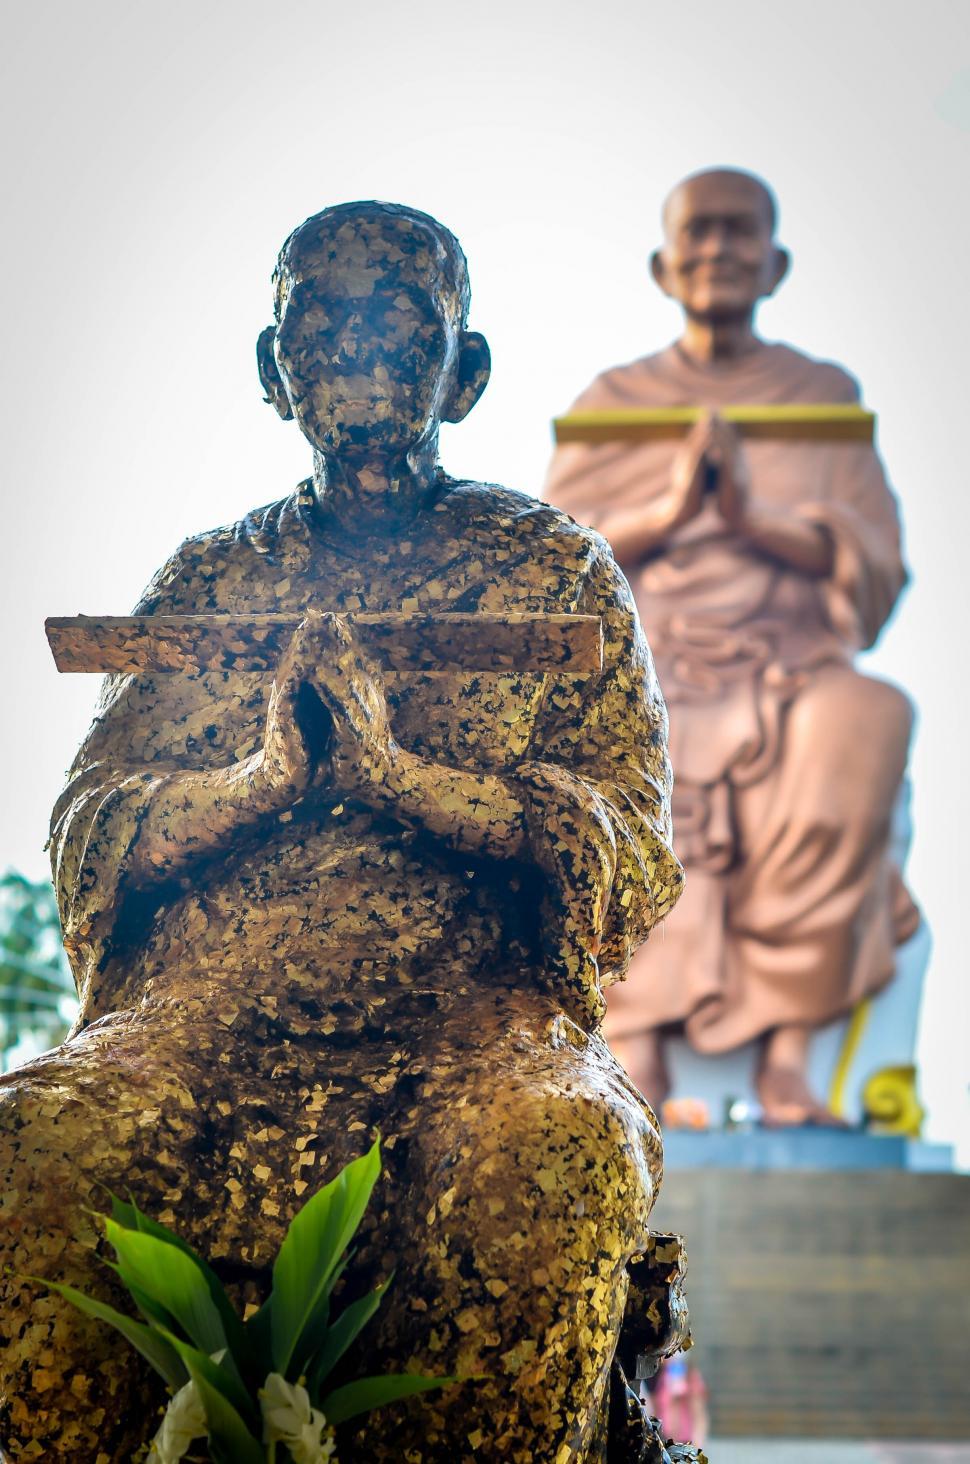 Free Image of Monk Statues in Thailand  